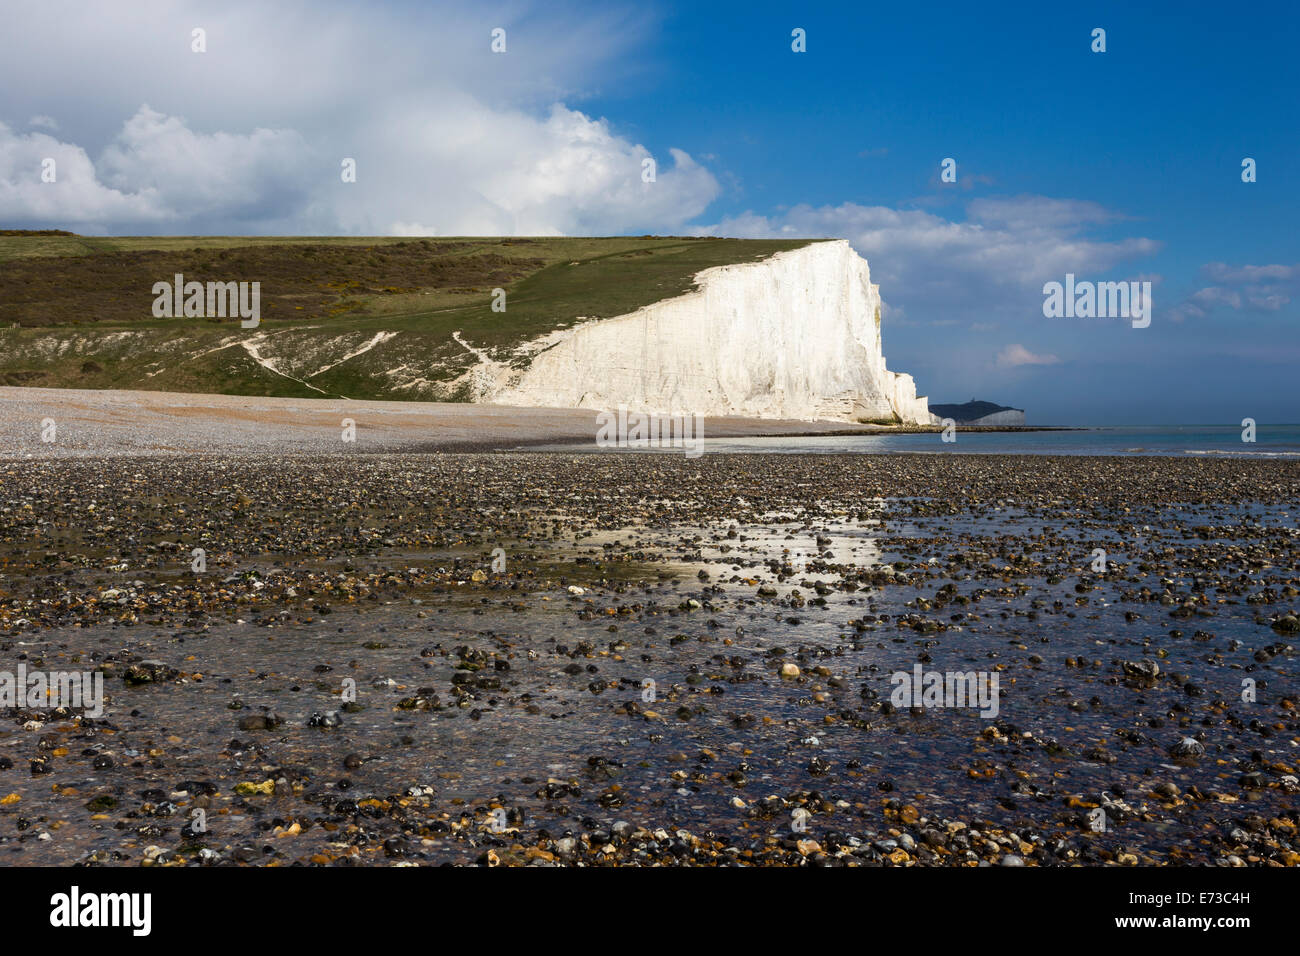 Pebble beach and the Seven Sisters Cliffs at Cuckmere Haven, Seaford, East Sussex, England, United Kingdom Stock Photo